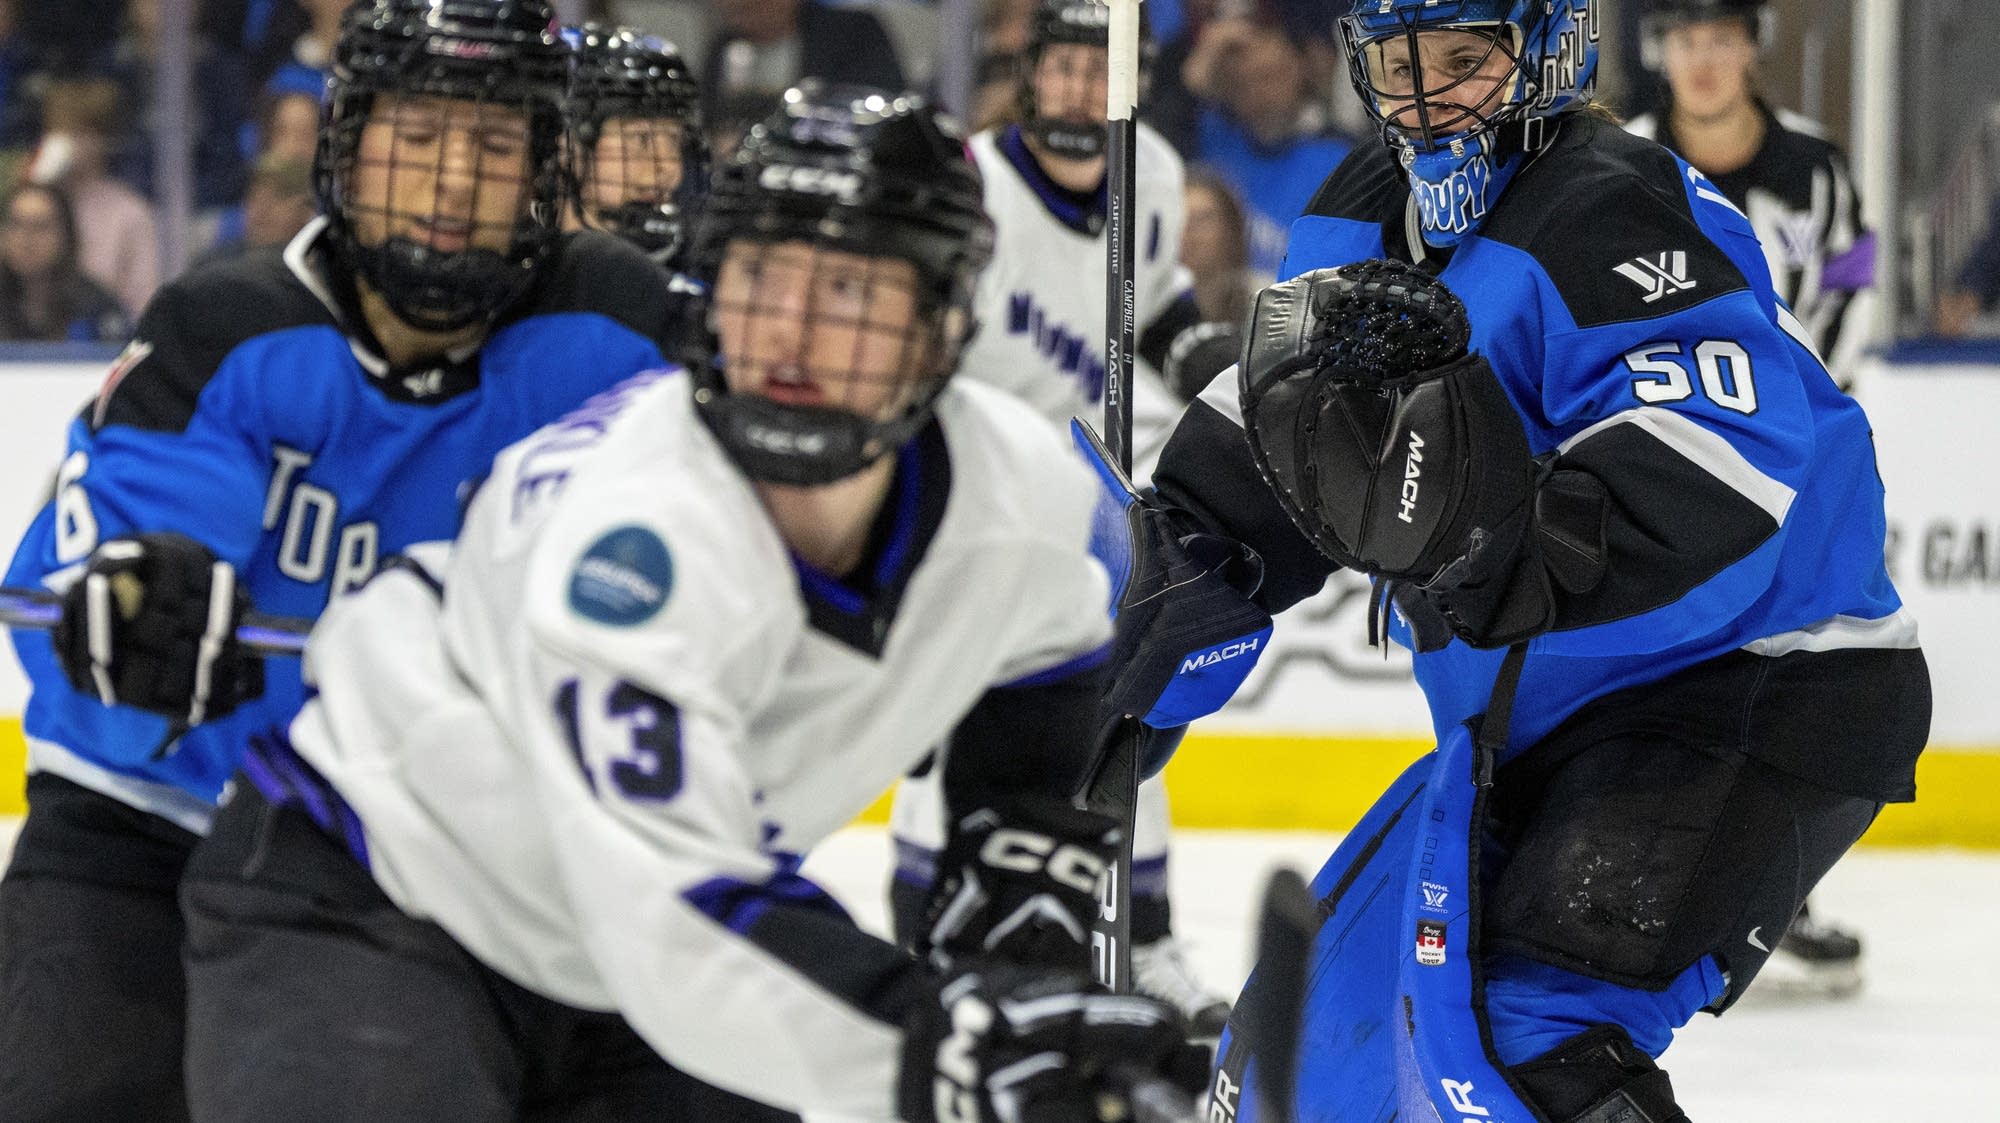 Turnbull scores twice as Toronto cruises past Minnesota 4-0 in first-ever PWHL playoff game